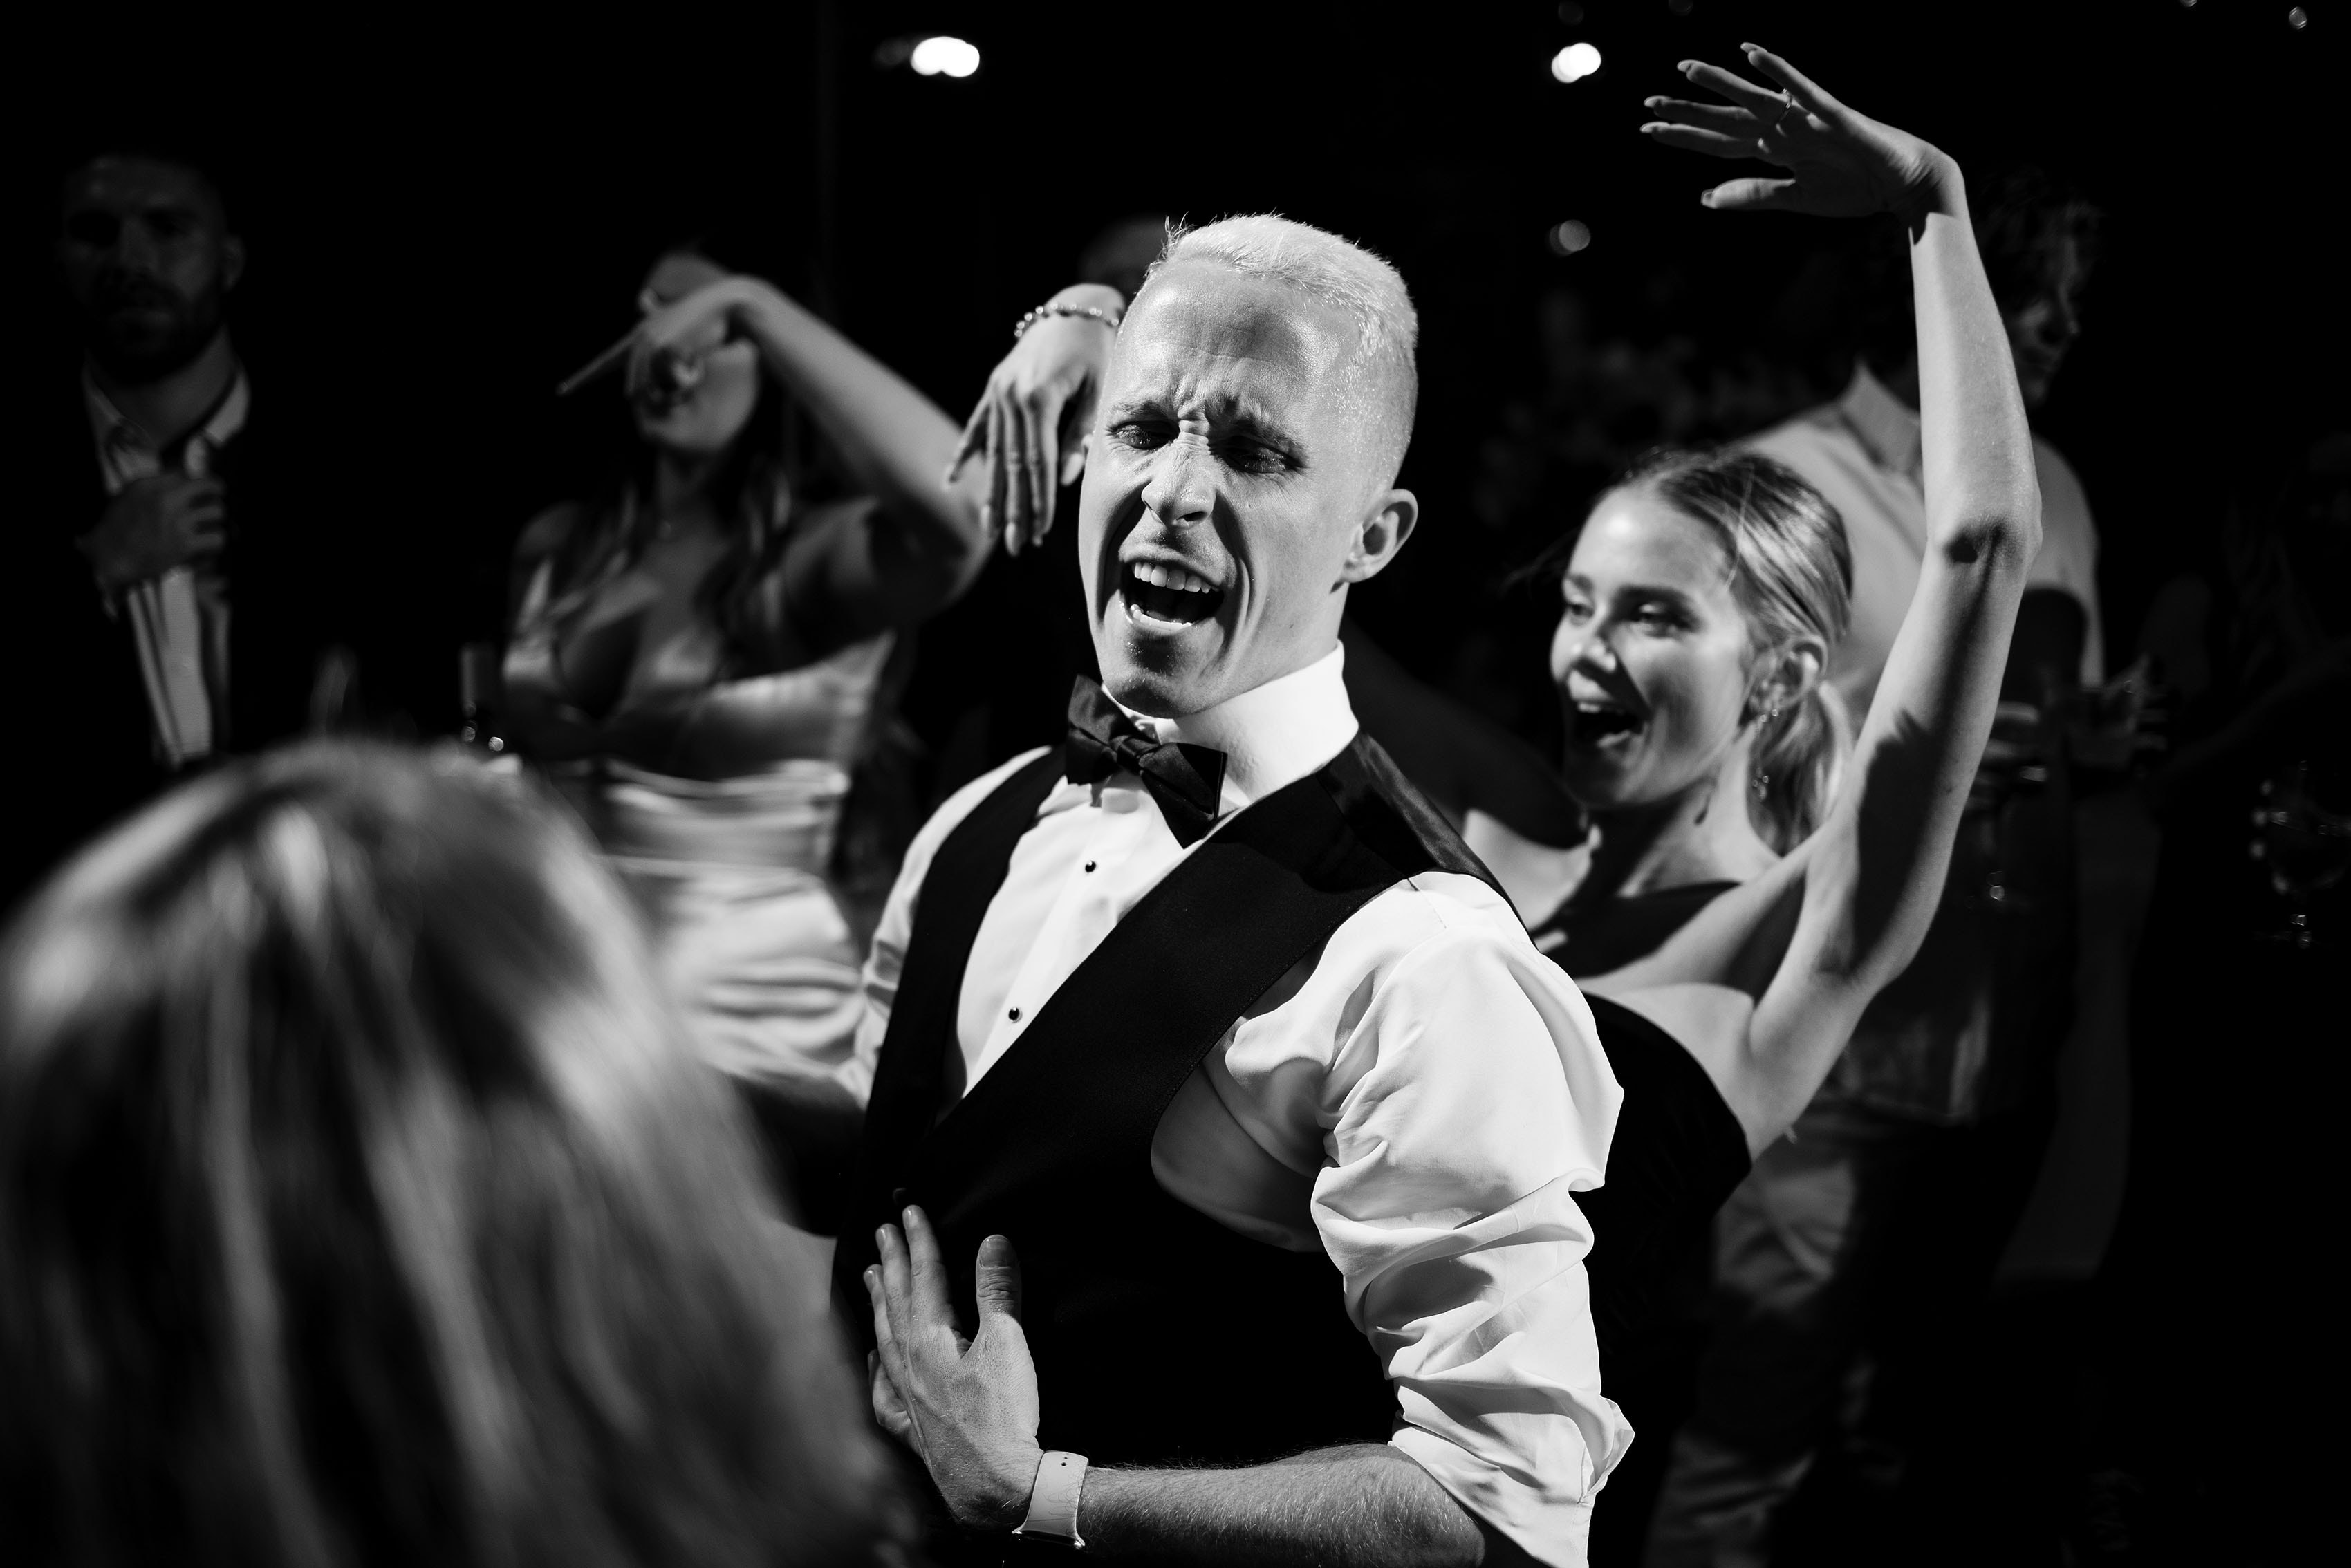 Guests dance during the wedding reception at Garden of the Gods Resort